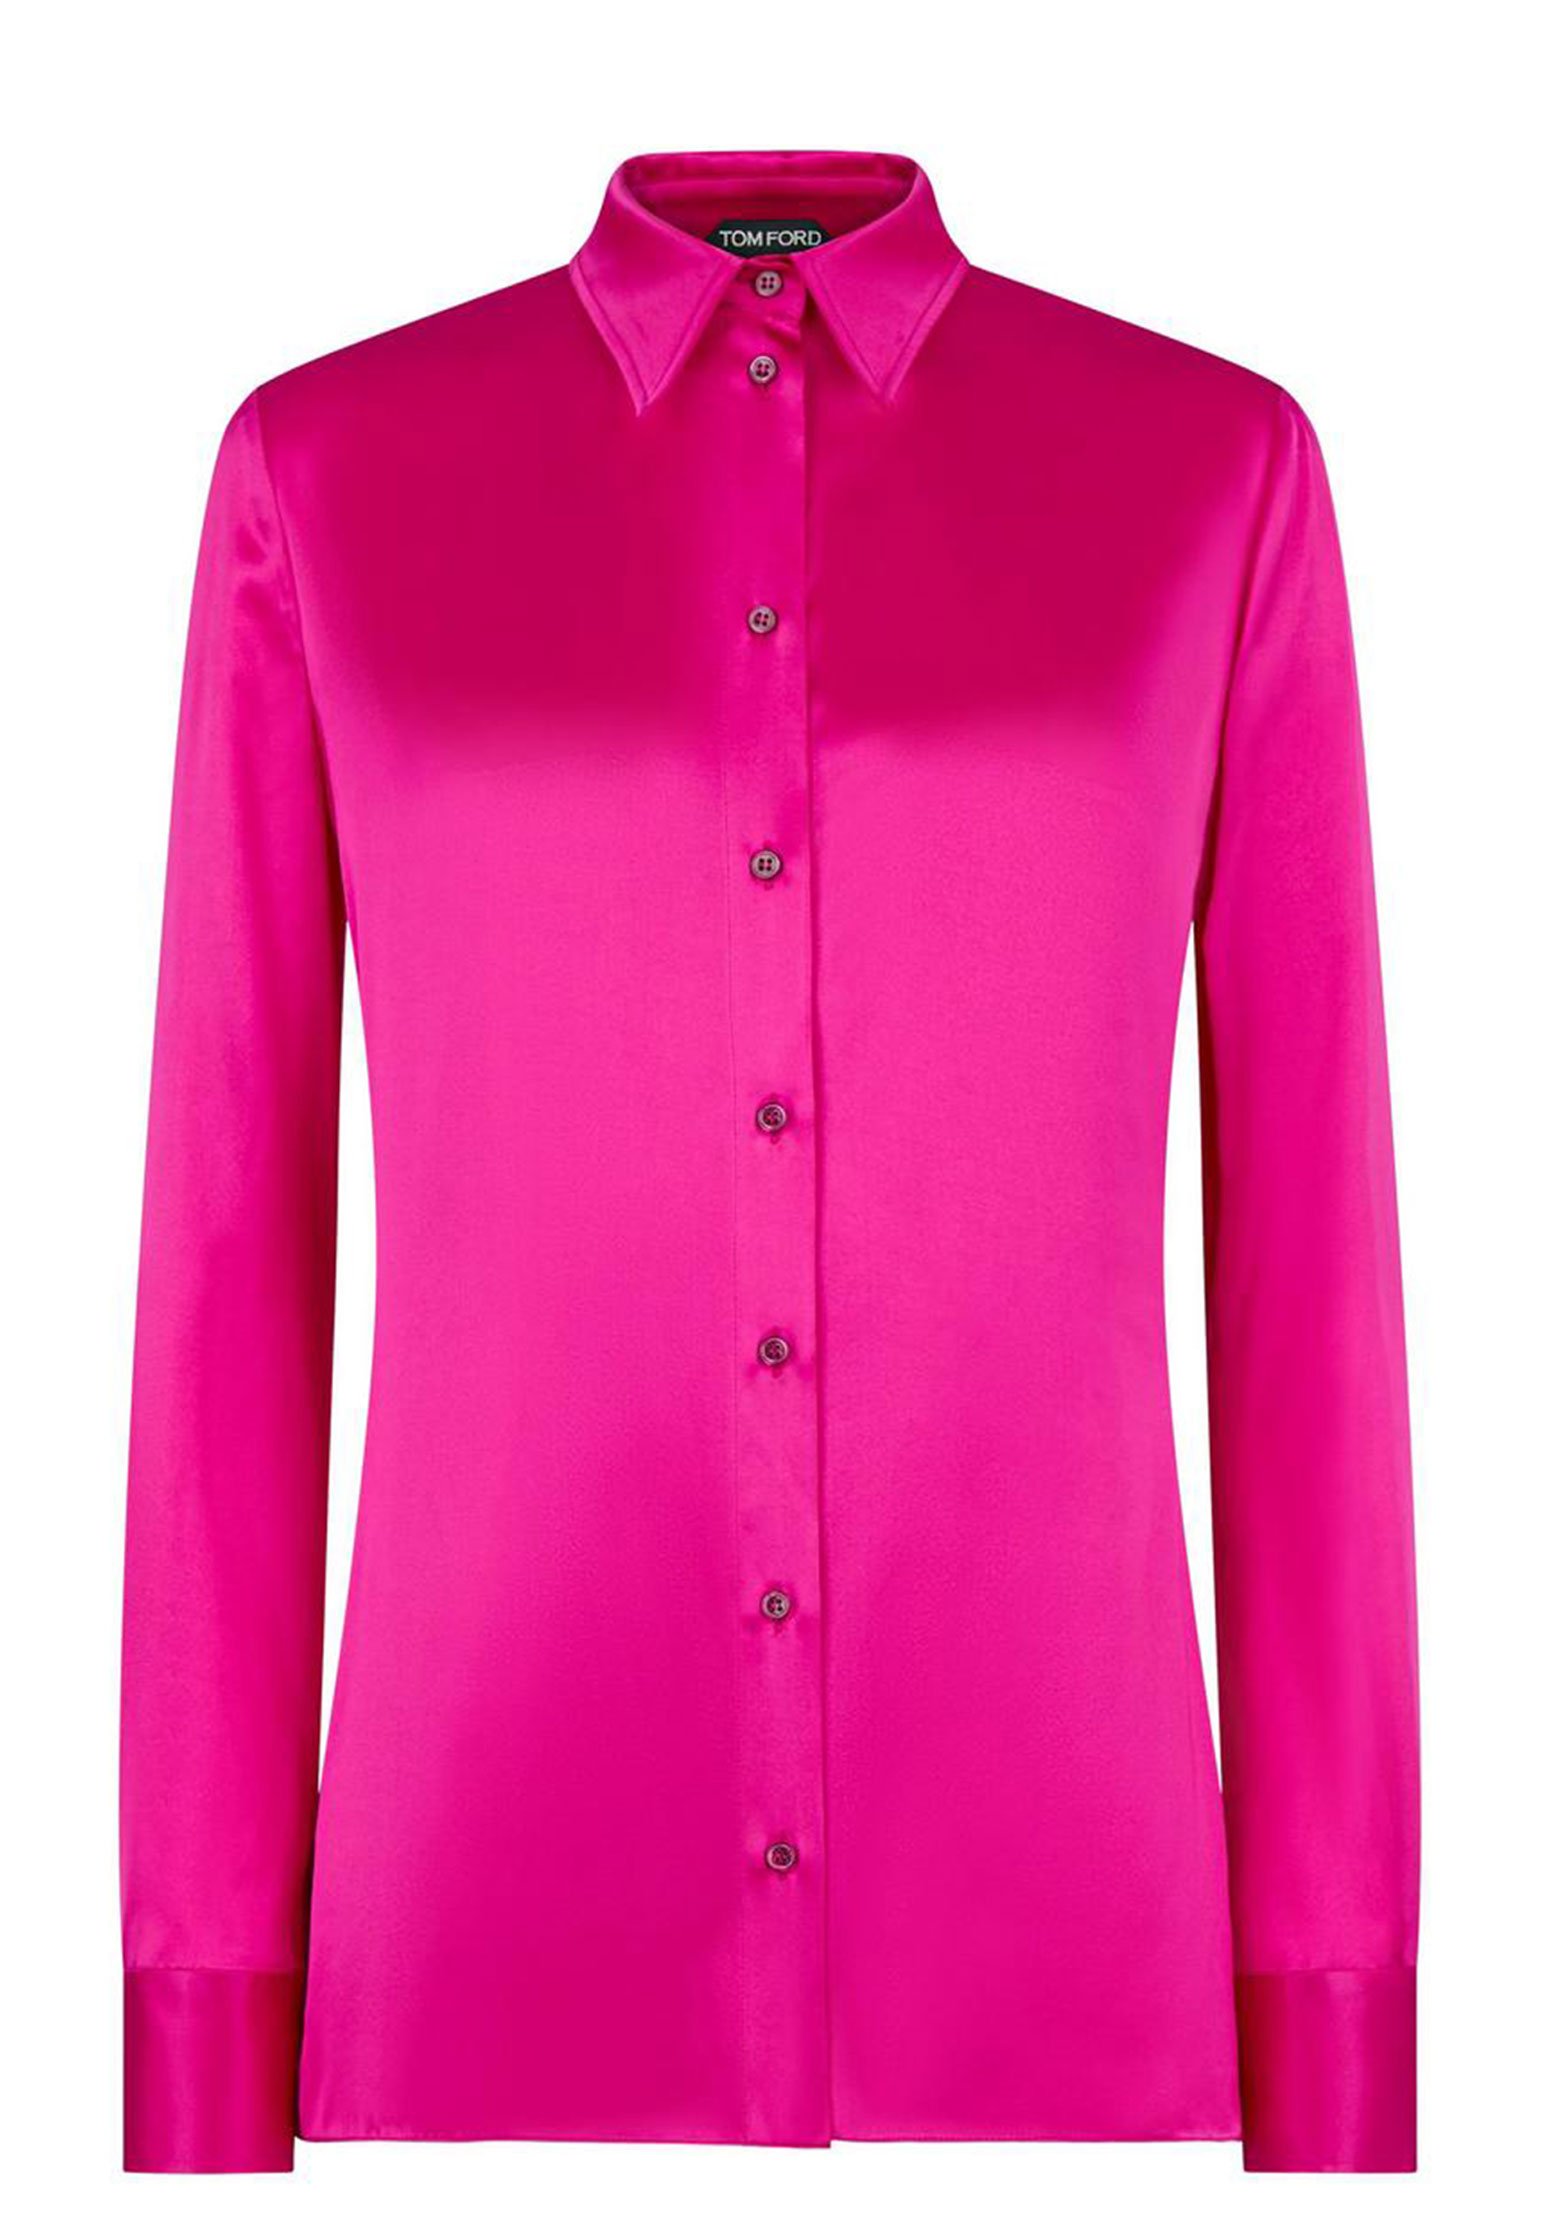 Shirt TOM FORD Color: pink (Code: 1930) in online store Allure